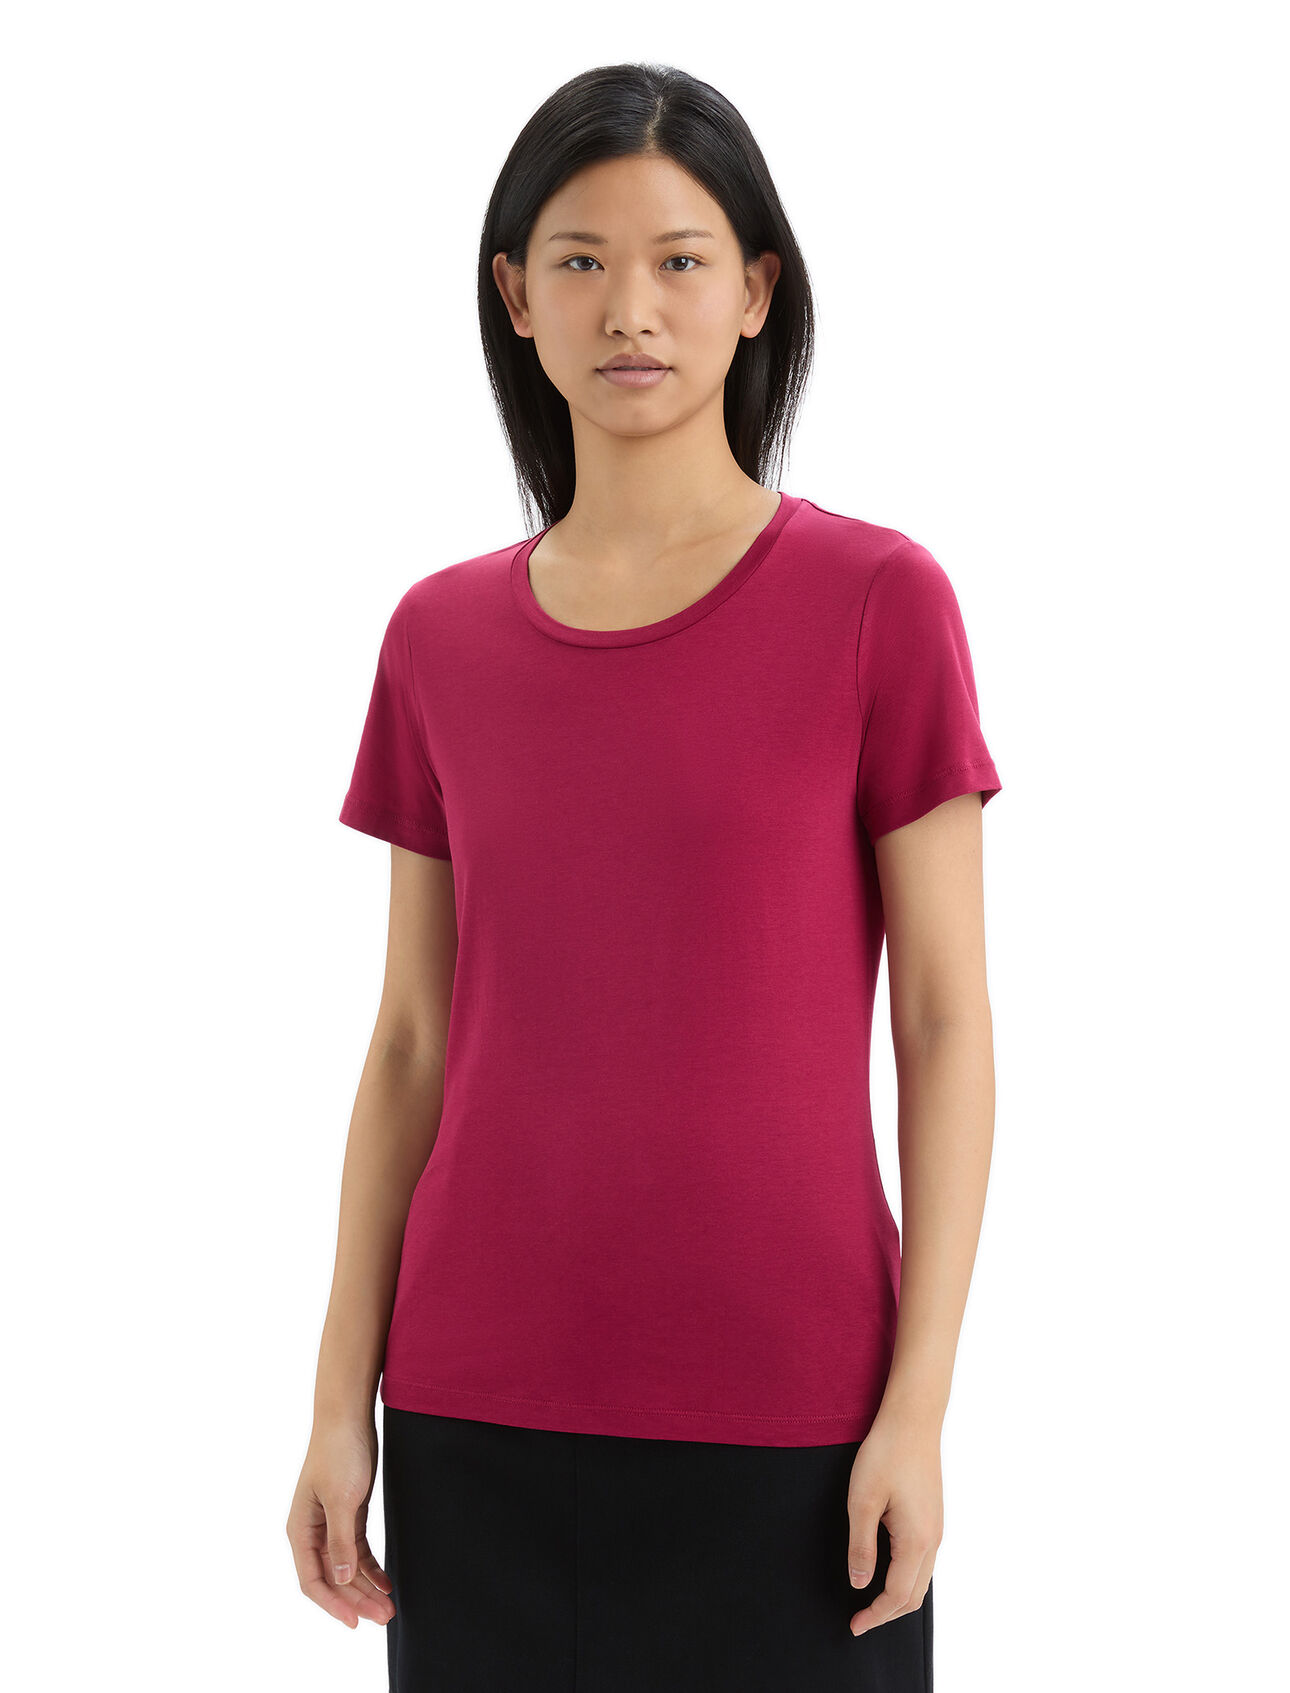 Womens Tencel™  Cotton Short Sleeve T-Shirt A clean and comfortable everyday tee with classic style, the TENCEL™ Cotton Short Sleeve Tee features a super-soft jersey fabric that blends organically grown cotton with TENCEL™ Lyocell. 